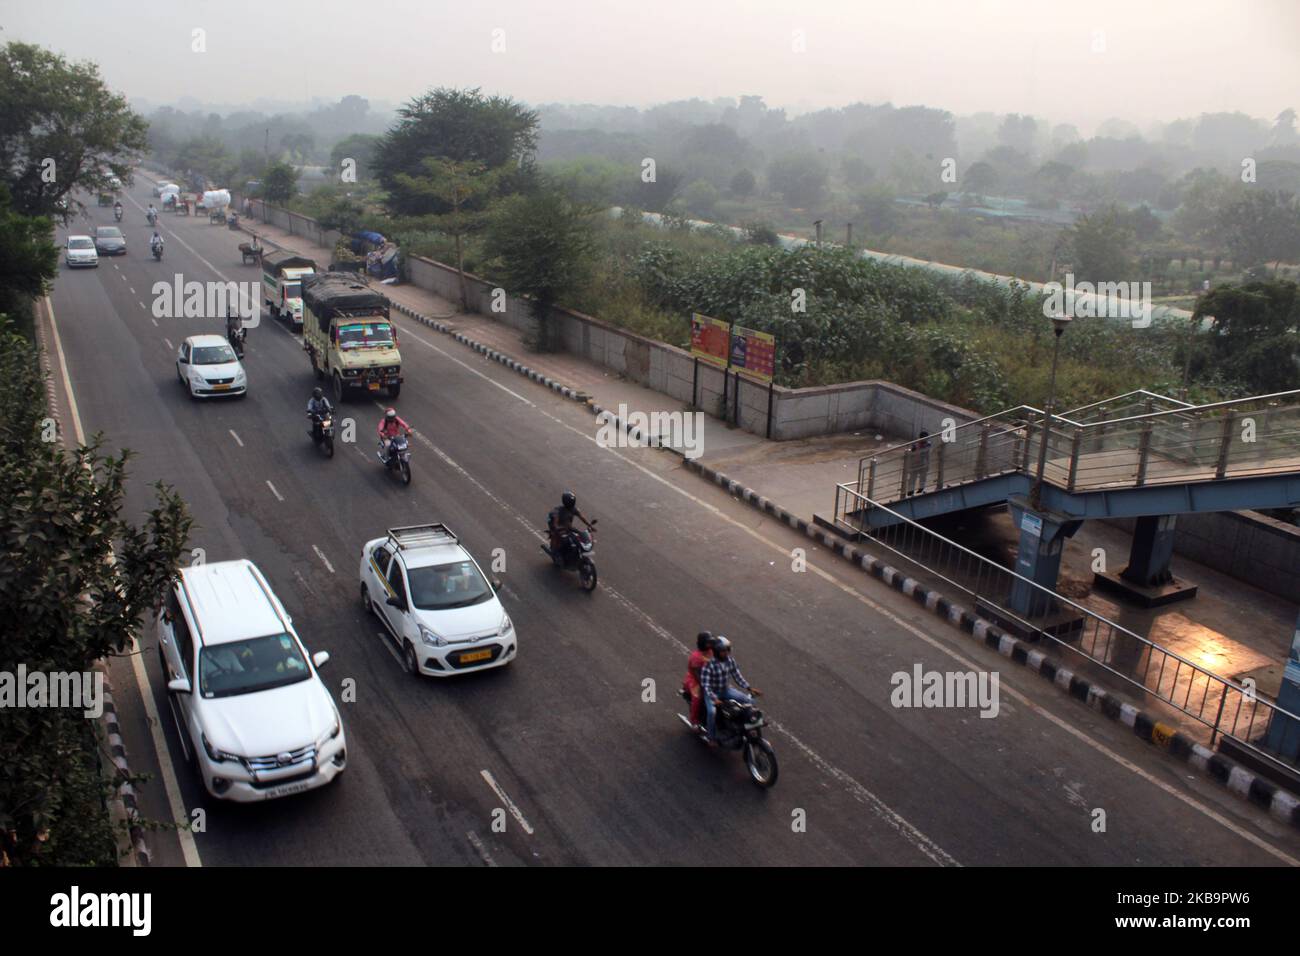 Pollution levels rose as toxic smog engulfs Delhi after Diwali celebrations in the national capital forcing government agencies to declare public health emergency in New Delhi, India on November 01, 2019. Smog levels spike during winter in Delhi, when air quality often eclipses the World Health Organization's safe levels. Cooler air traps pollutants, such as from vehicles, building sites and farmers burning crops in regions outside the Indian capital, close to the ground. (Photo by Mayank Makhija/NurPhoto) Stock Photo